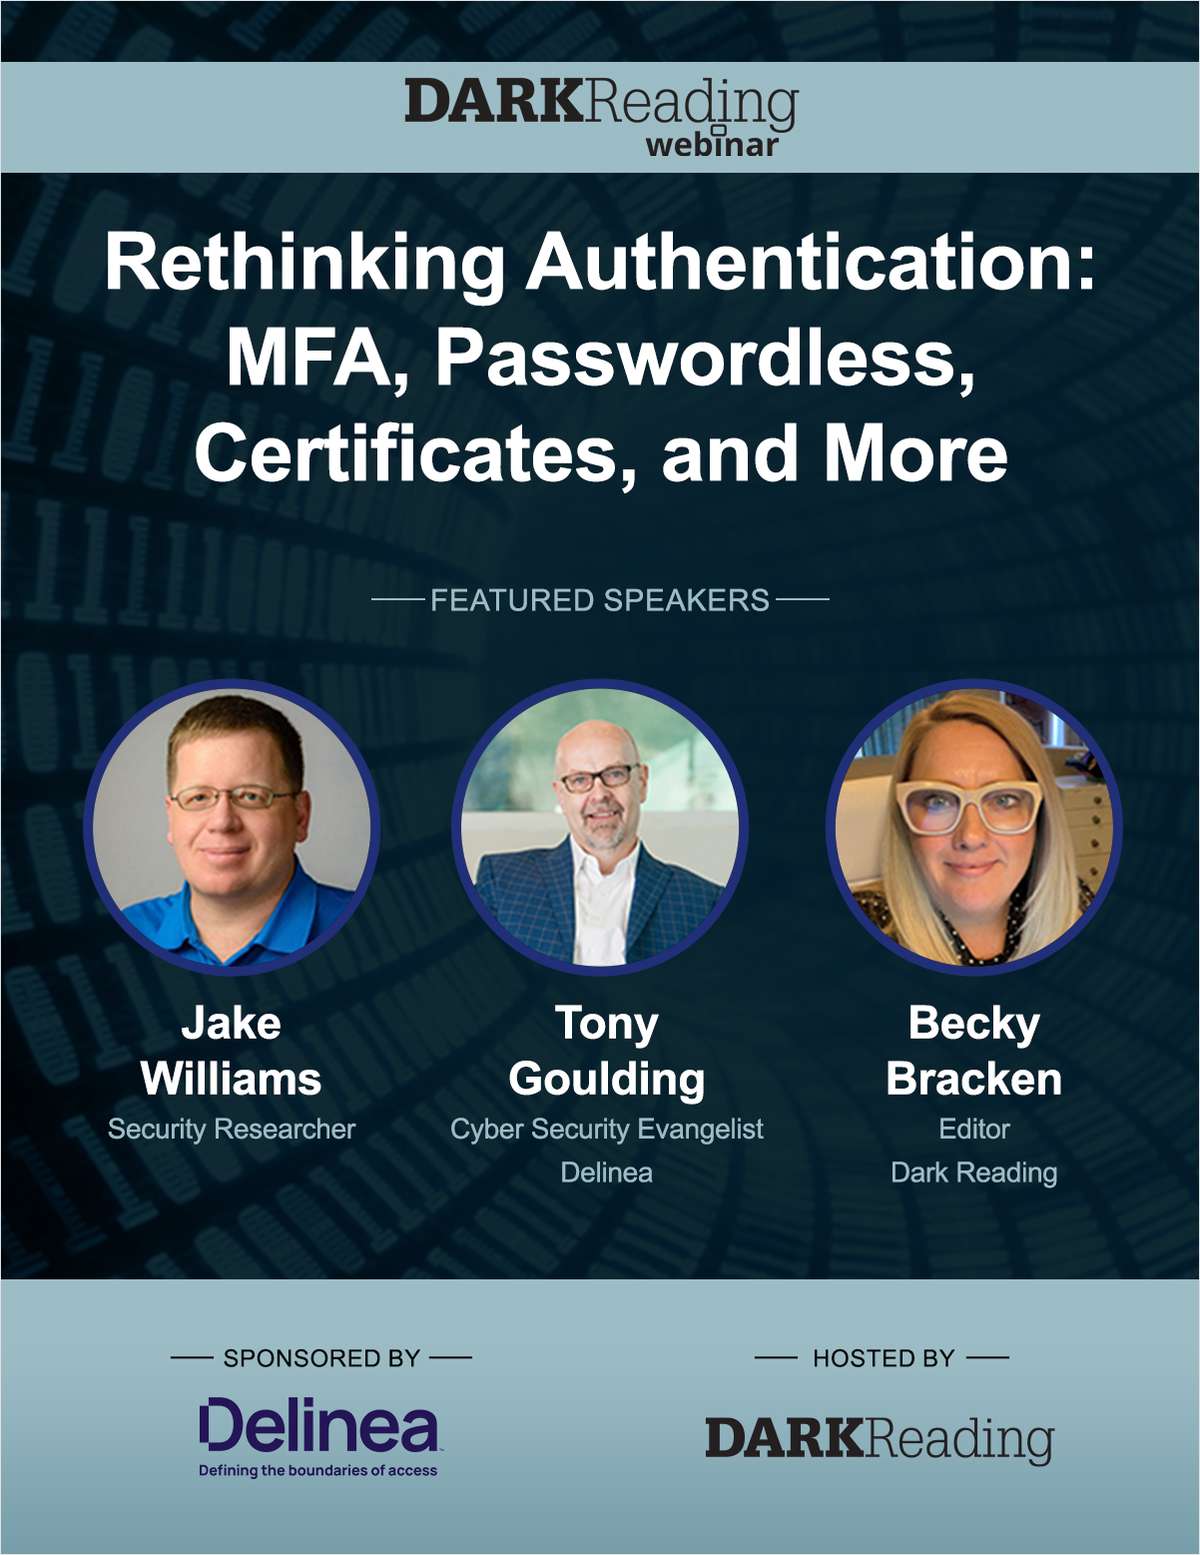 Rethinking Authentication: MFA, Passwordless, Certificates, and More